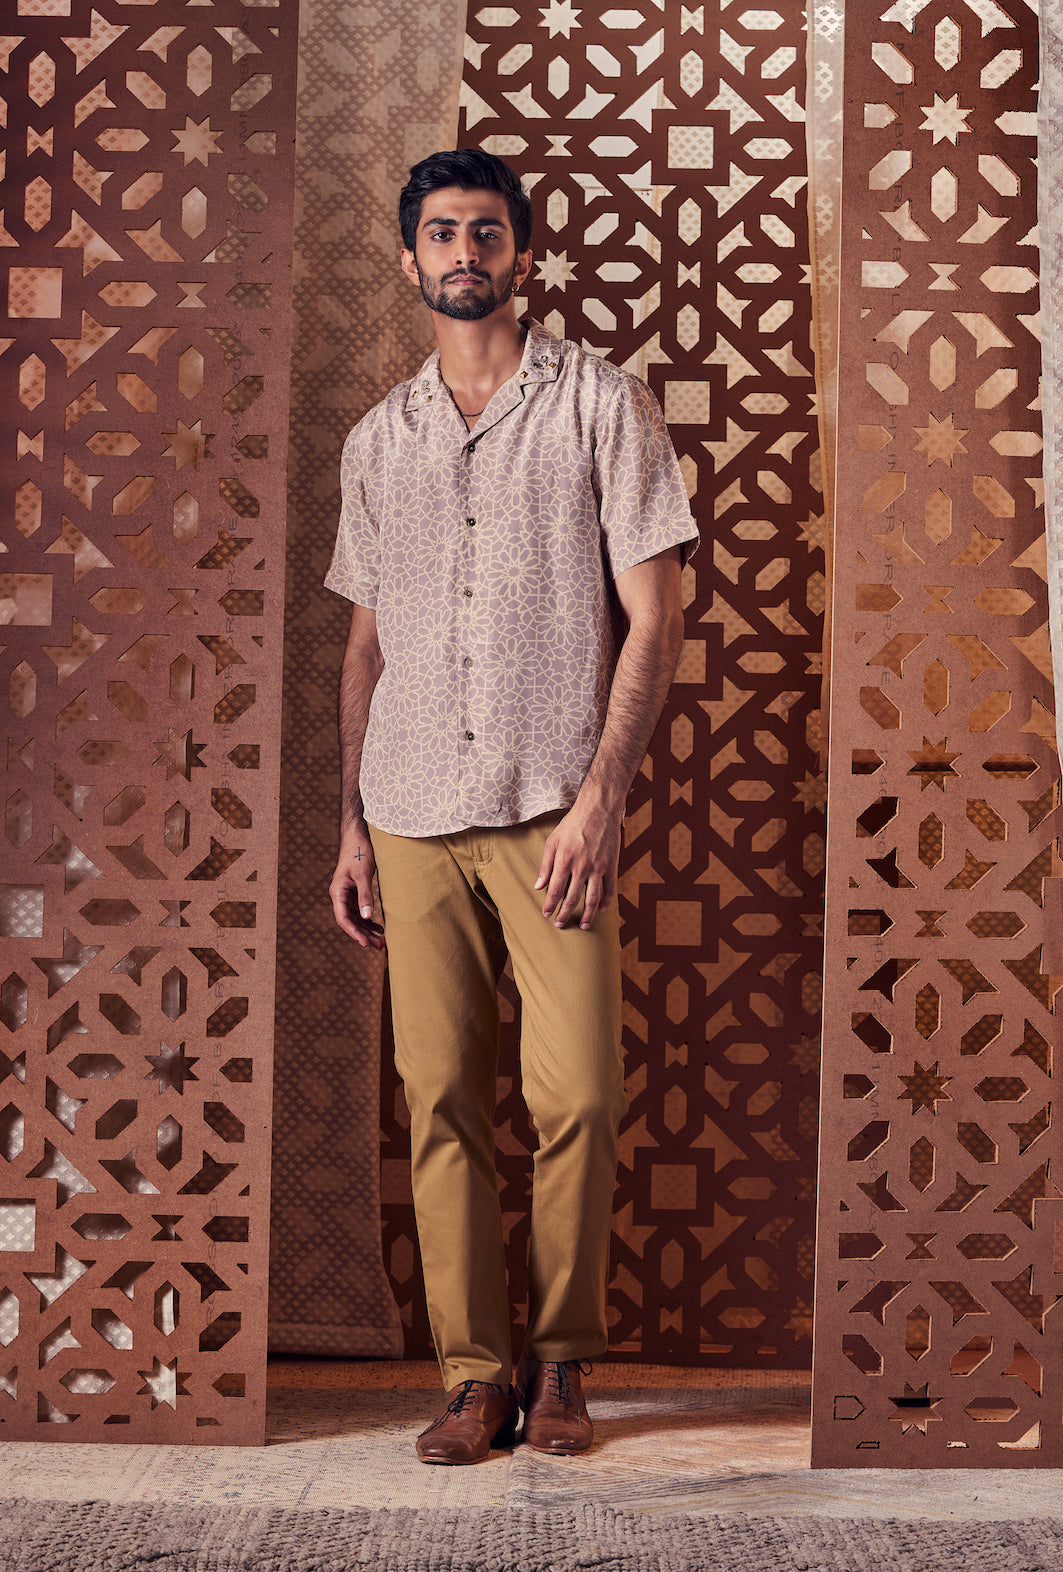 Men's Beige Printed Oversized Shirt at Kamakhyaa by Charkhee. This item is Beige, Cotton, Crepe, Embroidered, Ethnic Wear, For Anniversary, For Him, Menswear, Naayaab, Natural, Nayaab, Relaxed Fit, Shirts, Tops